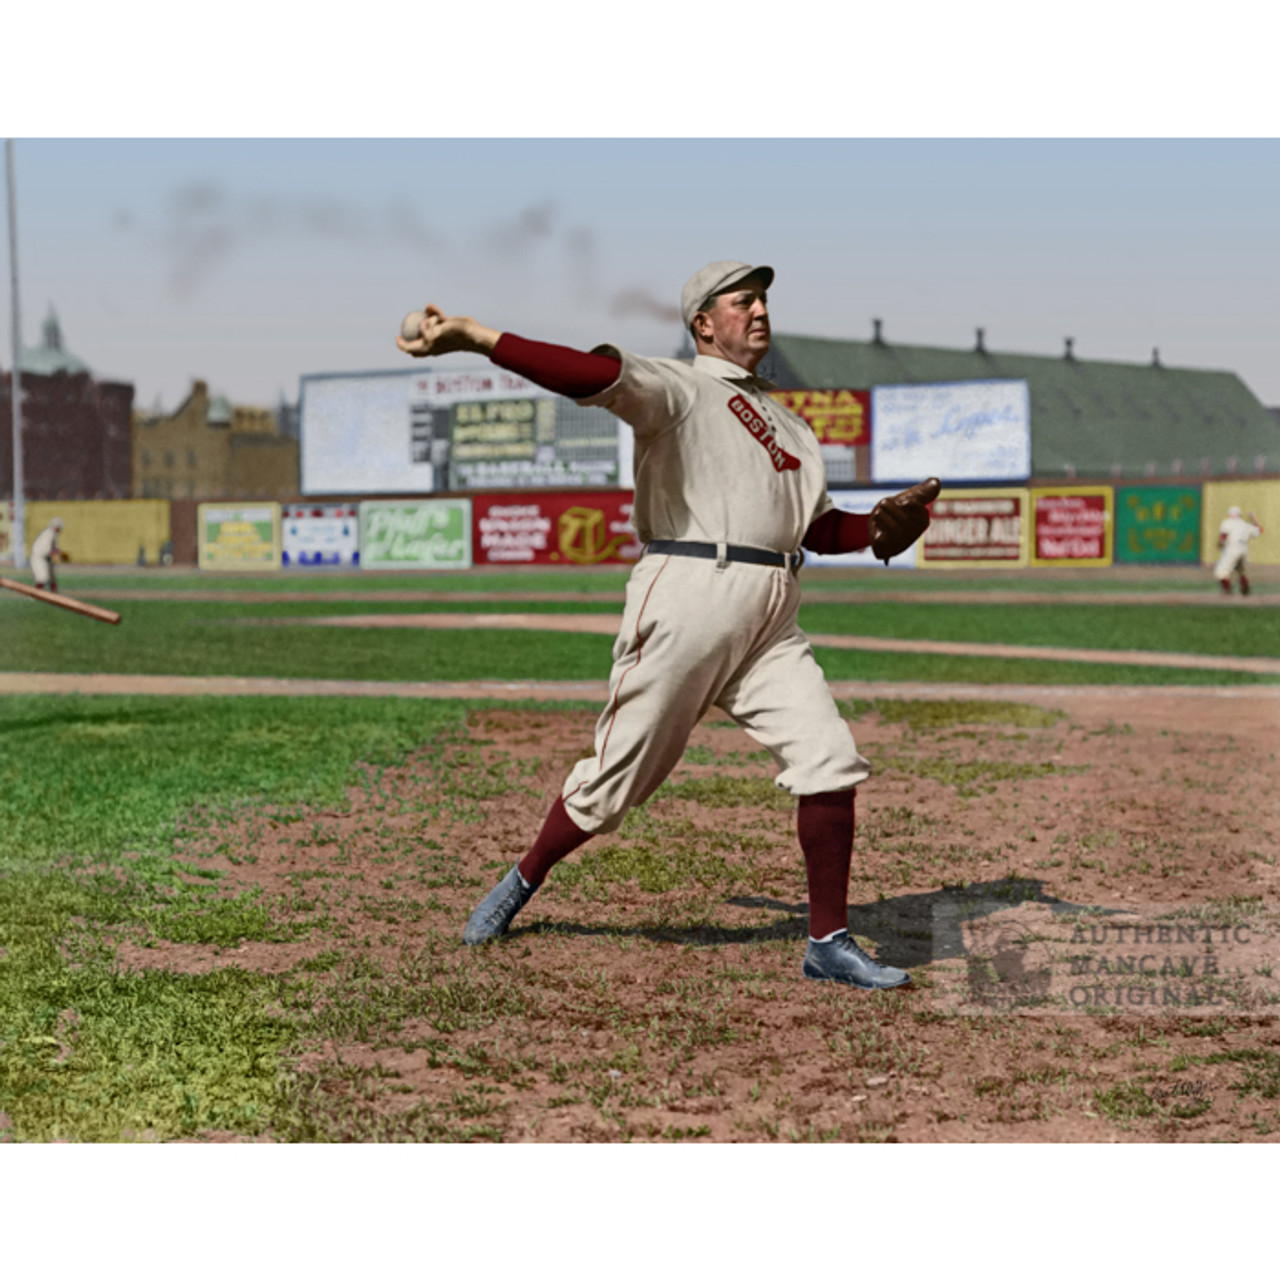 Cy Young 1908 Boston Red Sox 11 x 14 Colorized Print